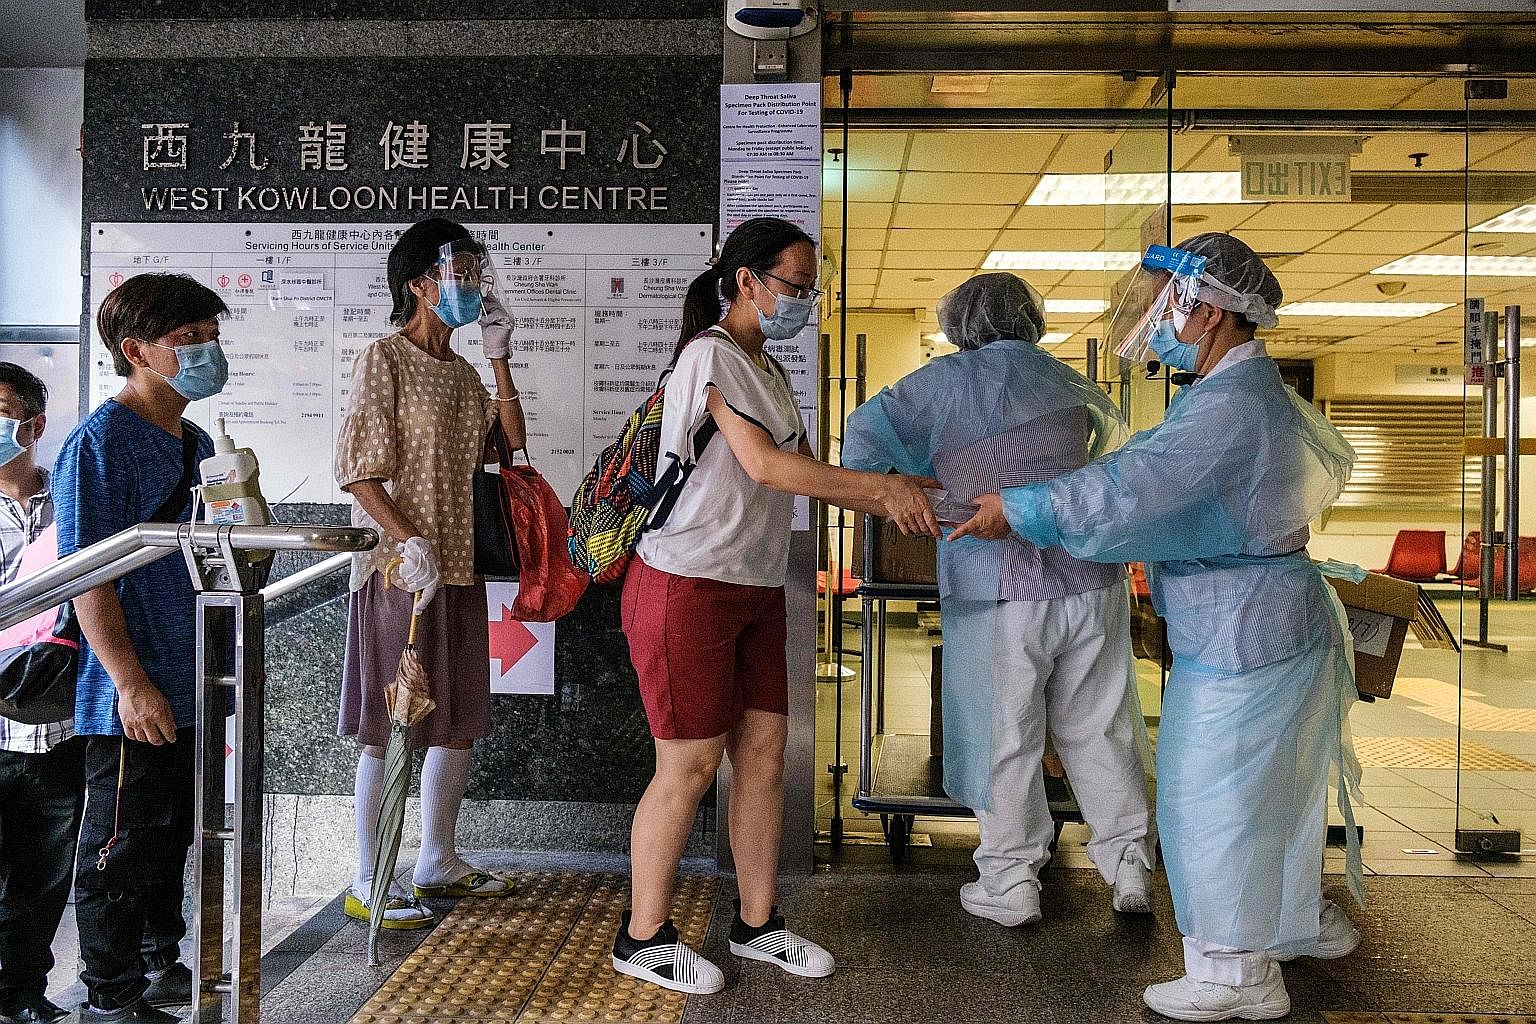 Workers at a government clinic giving out free coronavirus test kits to residents in Hong Kong's Sham Shui Po district early yesterday morning, as part of a citywide testing initiative. Hong Kong's confirmed Covid-19 infections have surpassed the 3,0